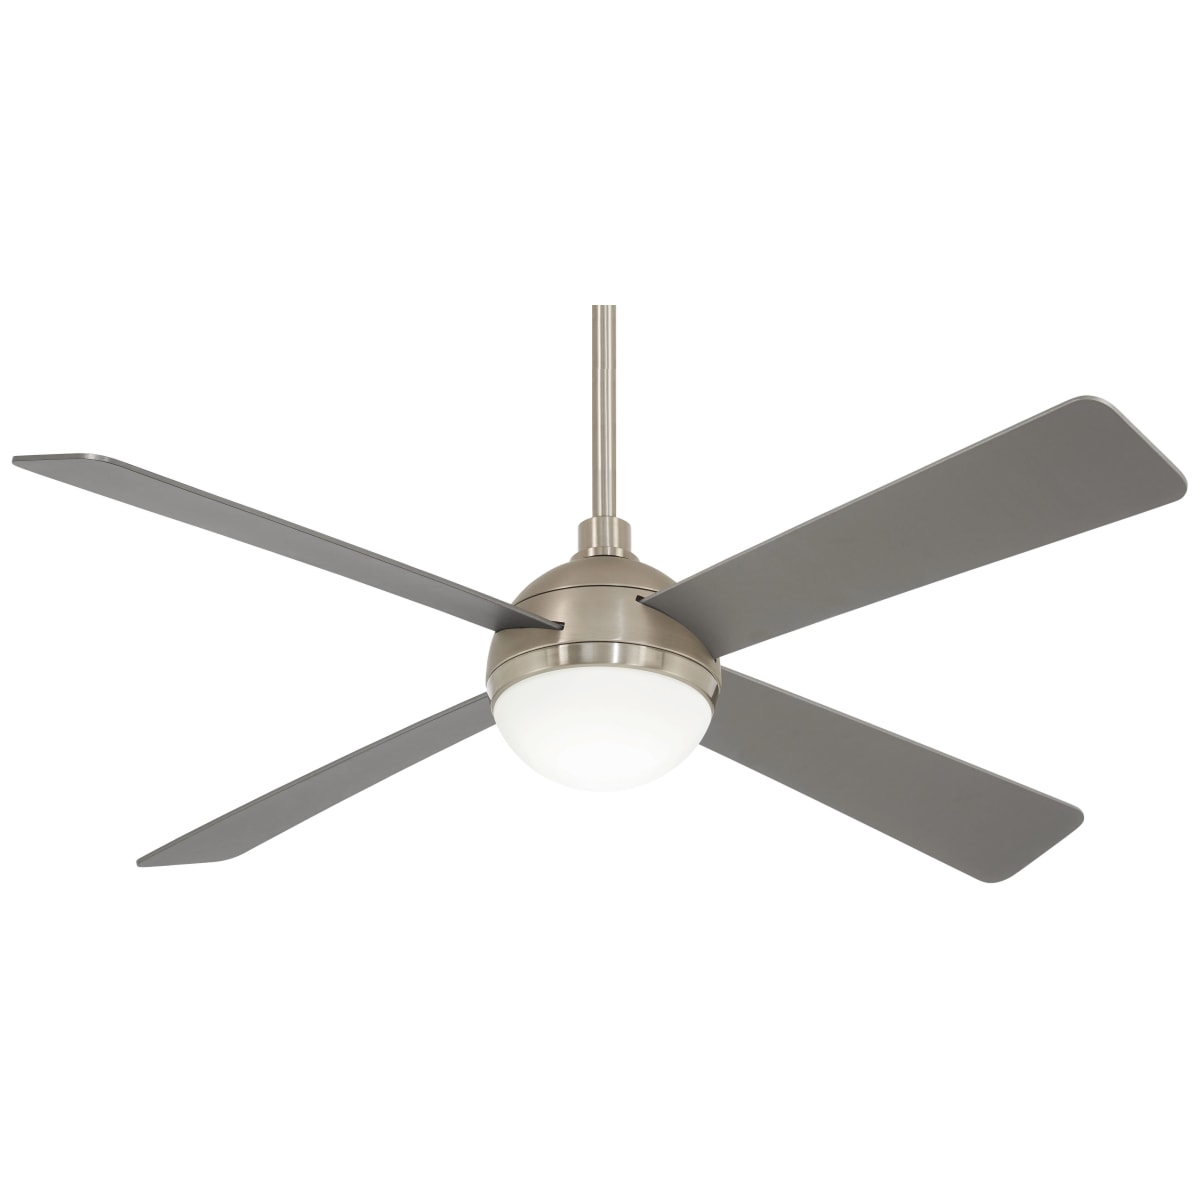 Lamps Lighting Ceiling Fans Ceiling Fans Nickel Minkaaire